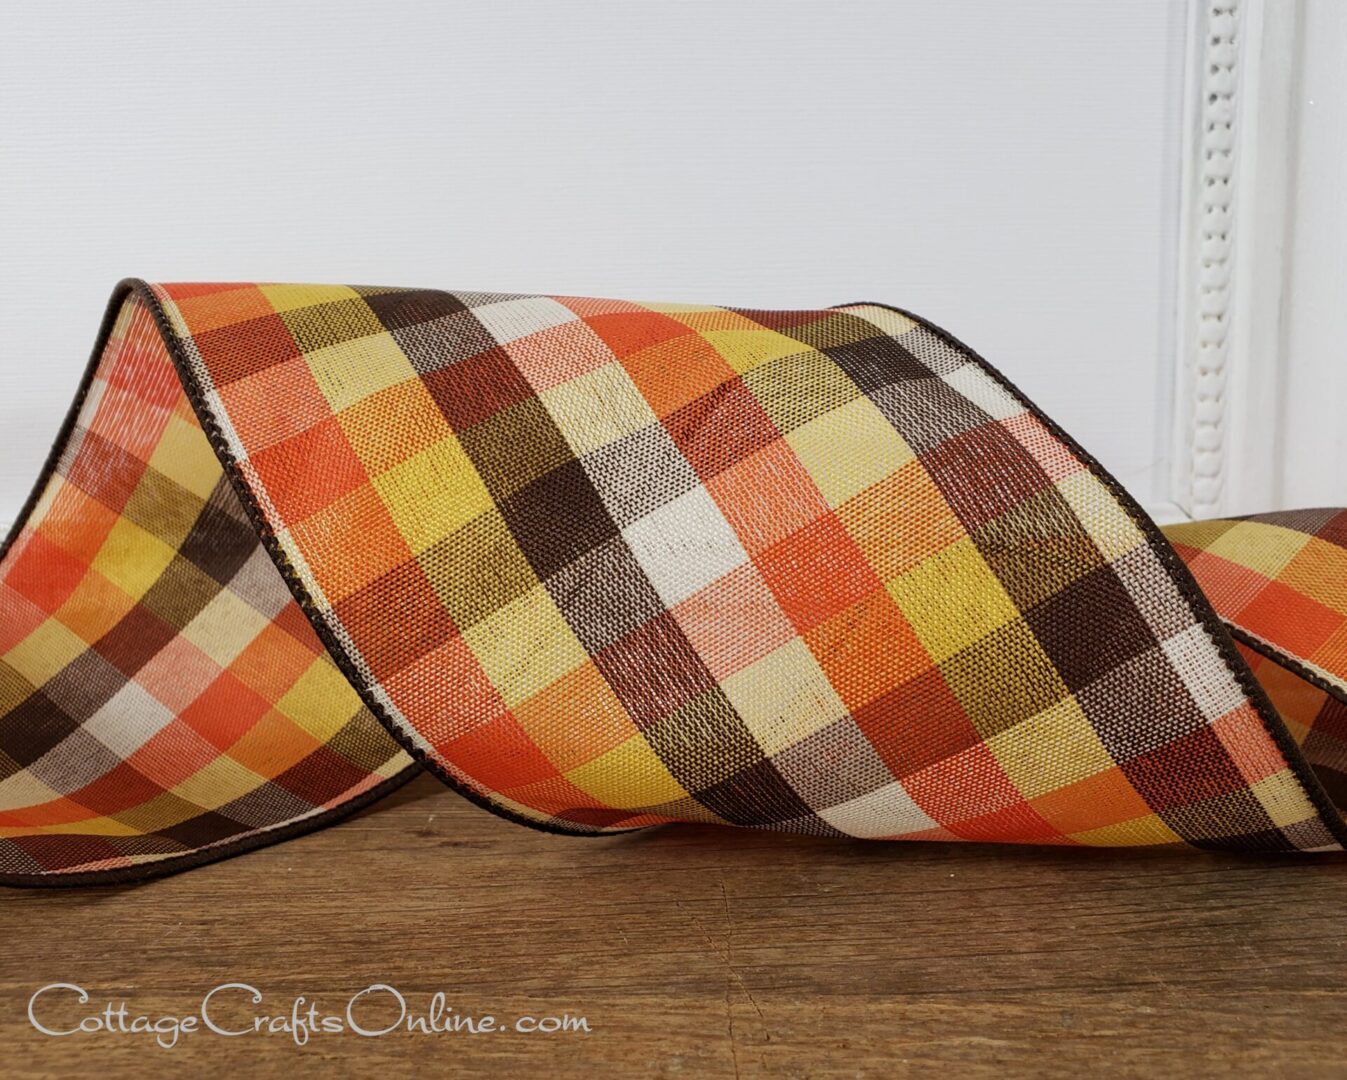 Candy corn orange yellow brown ivory check 4" wide wired ribbon from the Etsy shop of Cottage Crafts Online.